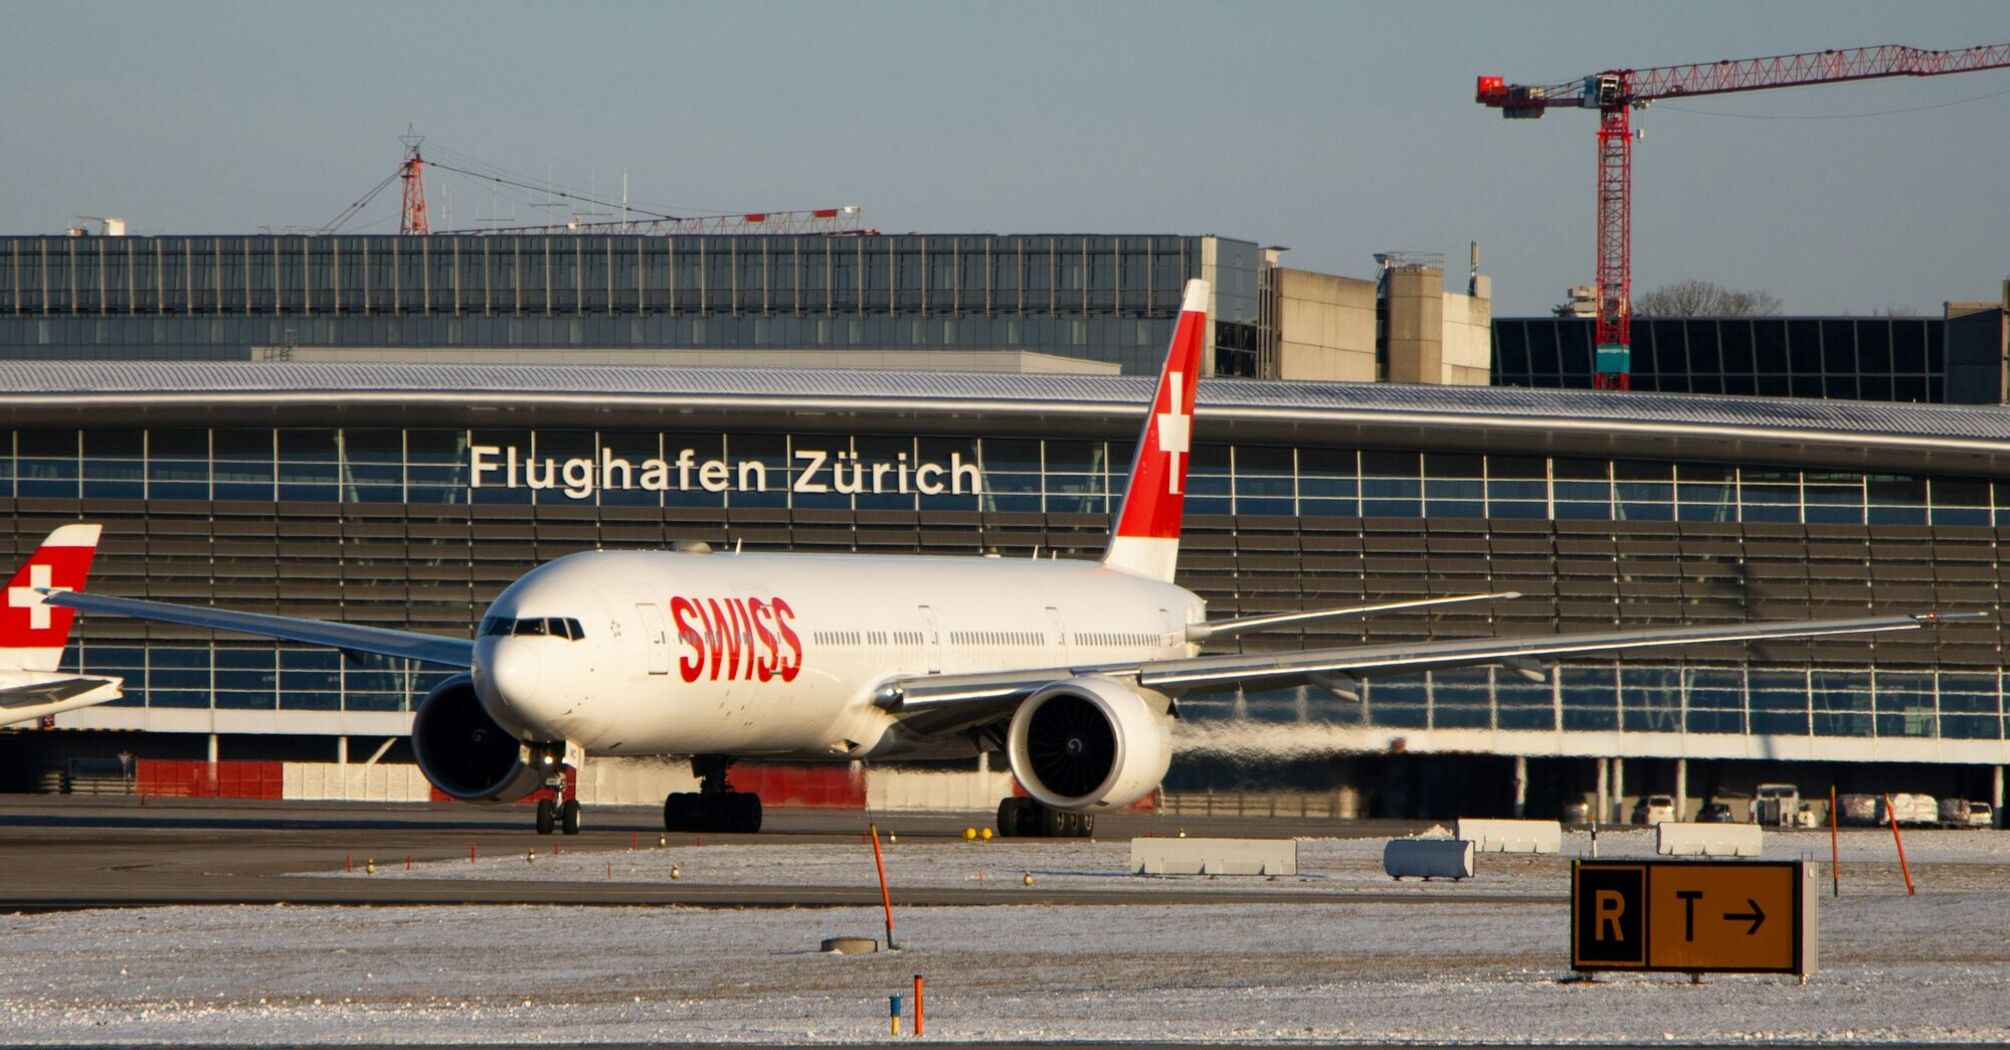 A SWISS airplane on a runway at Zurich Airport, with the airport terminal in the background